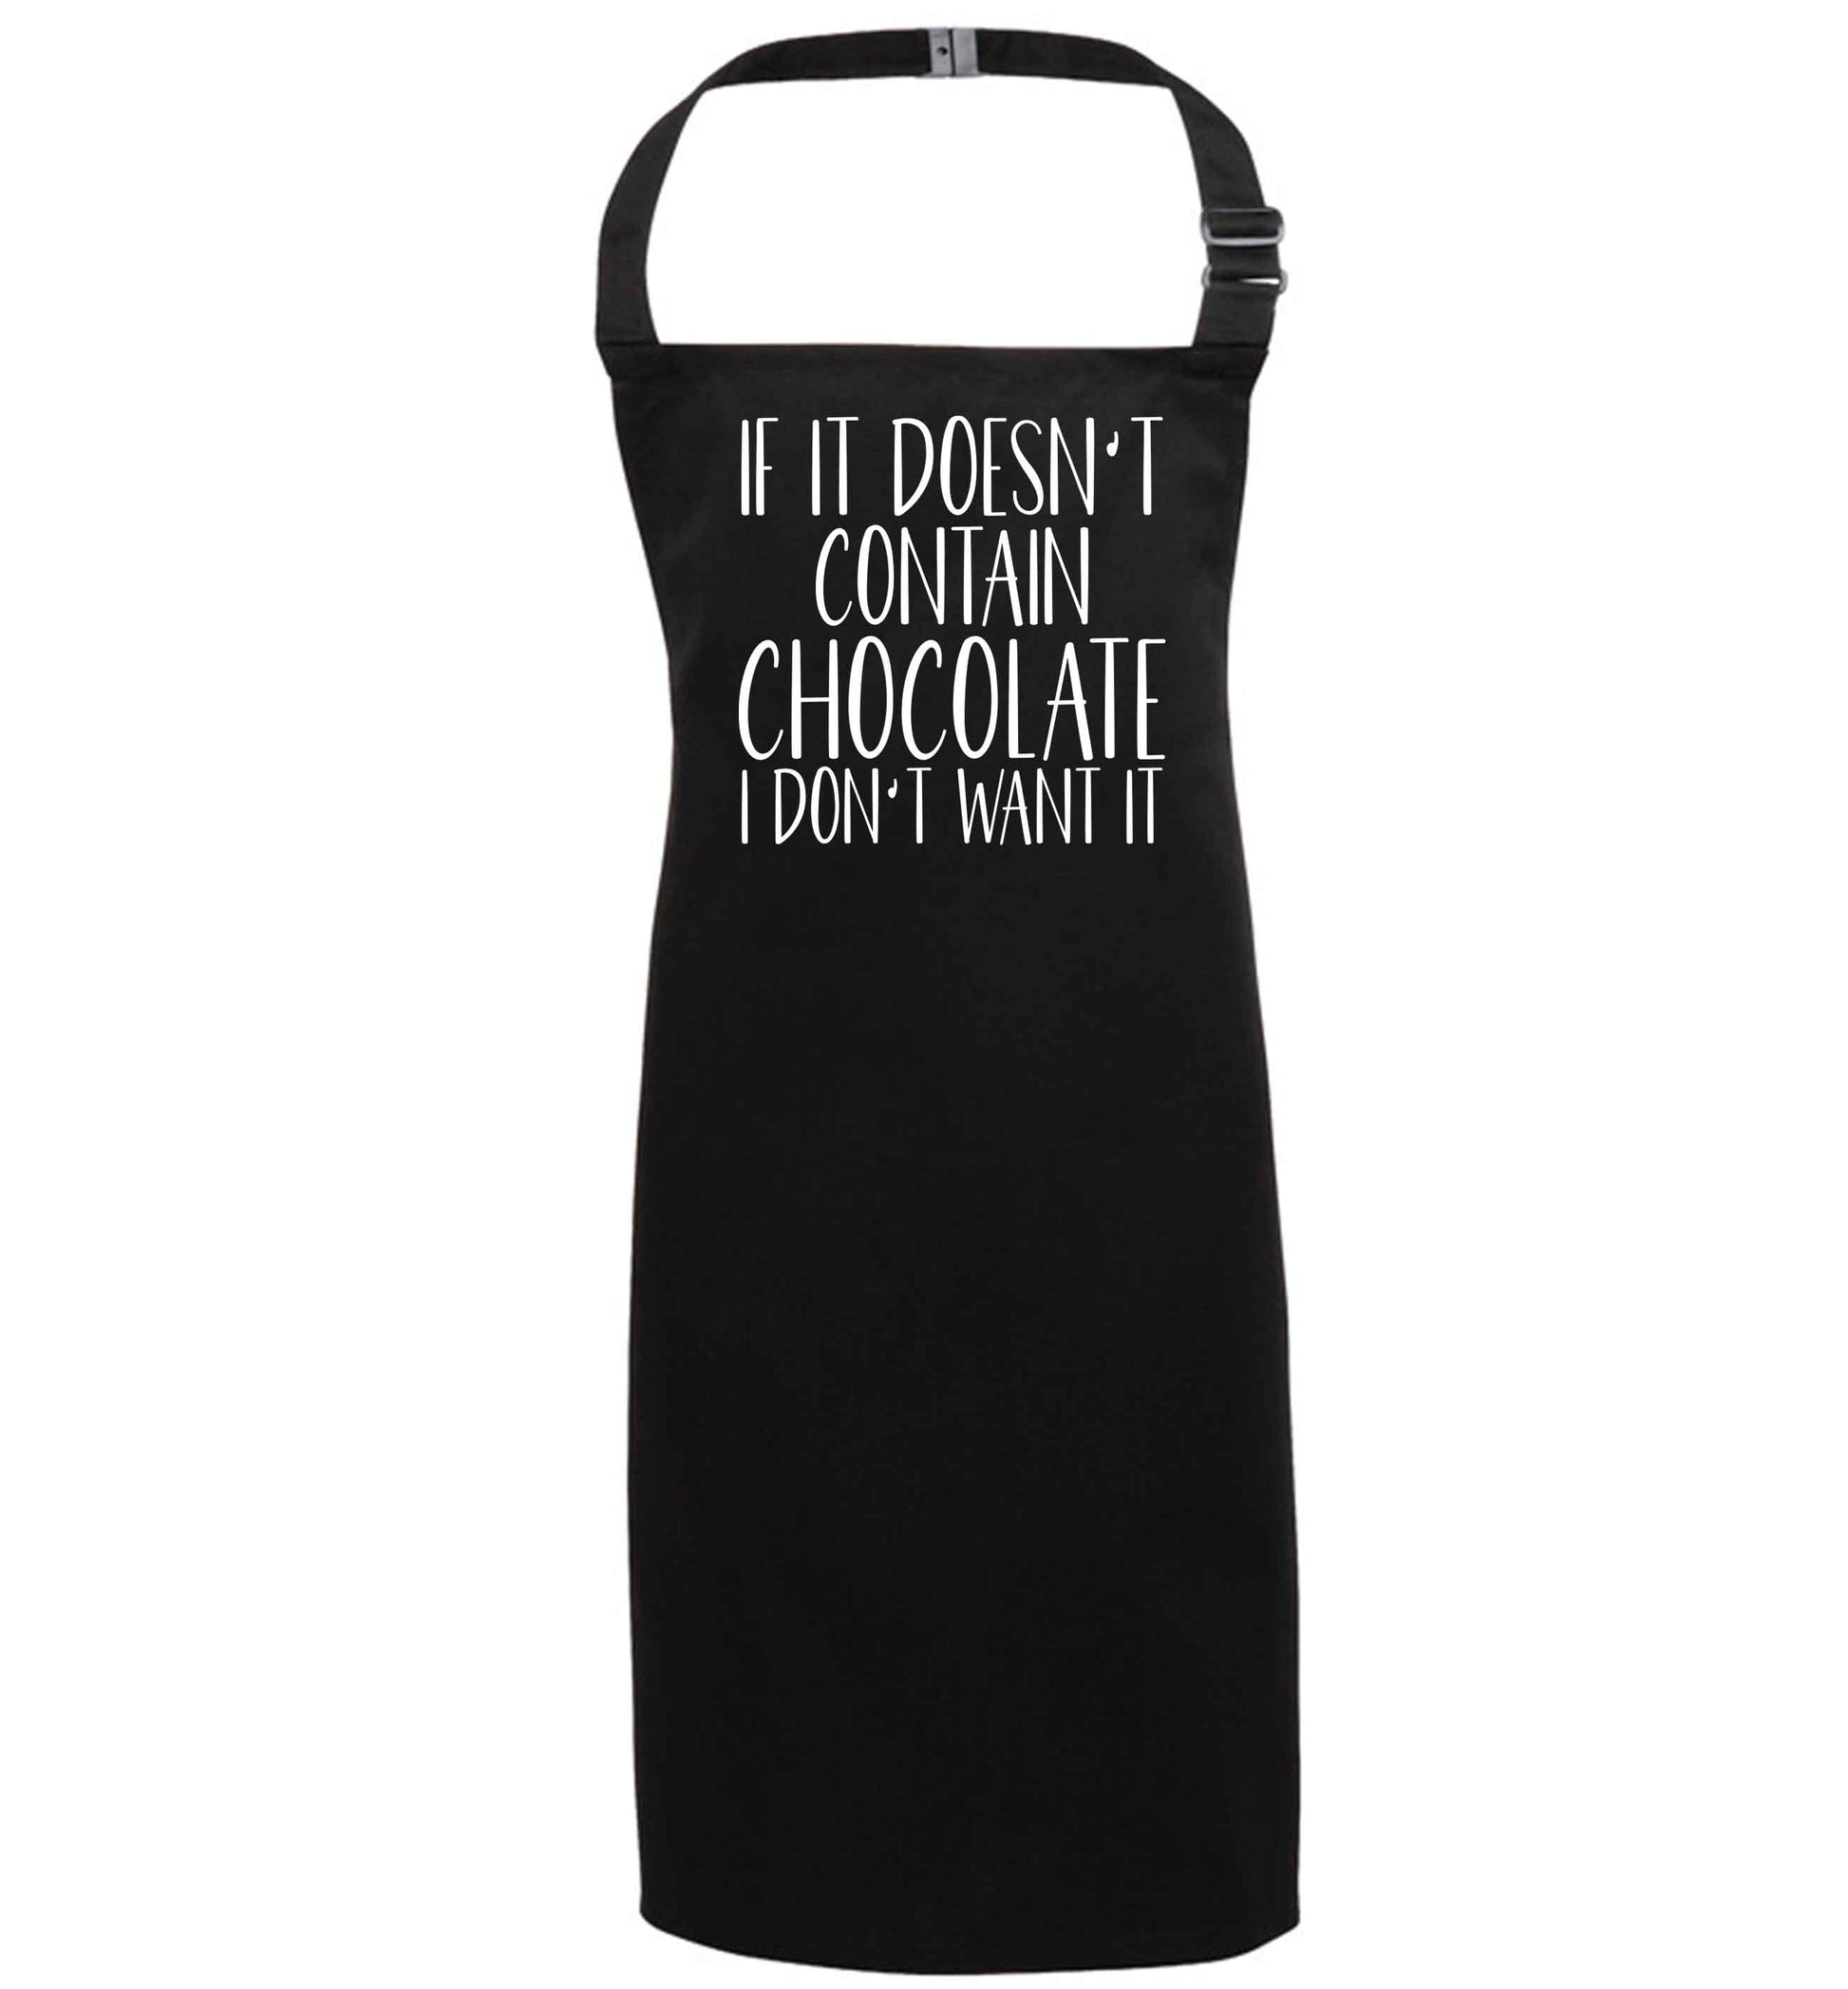 If it doesn't contain chocolate I don't want it black apron 7-10 years